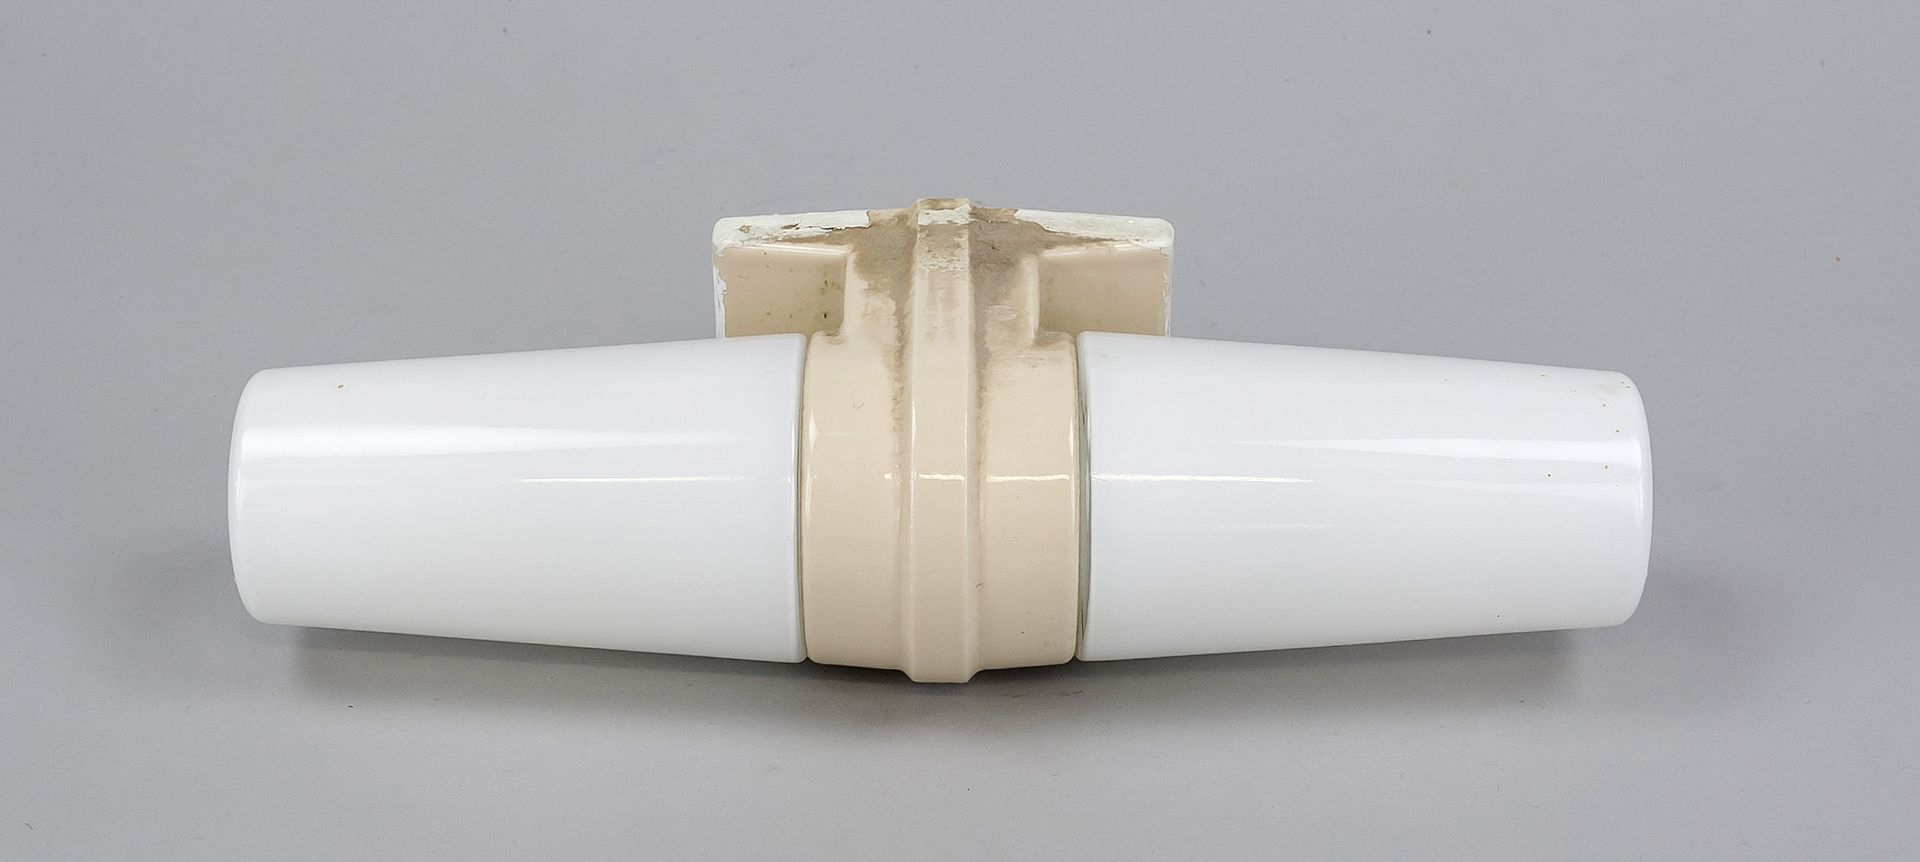 Bauhaus wall lamp, mid-20th century, ceramic and glass, design after Wagenfeld, two white frosted